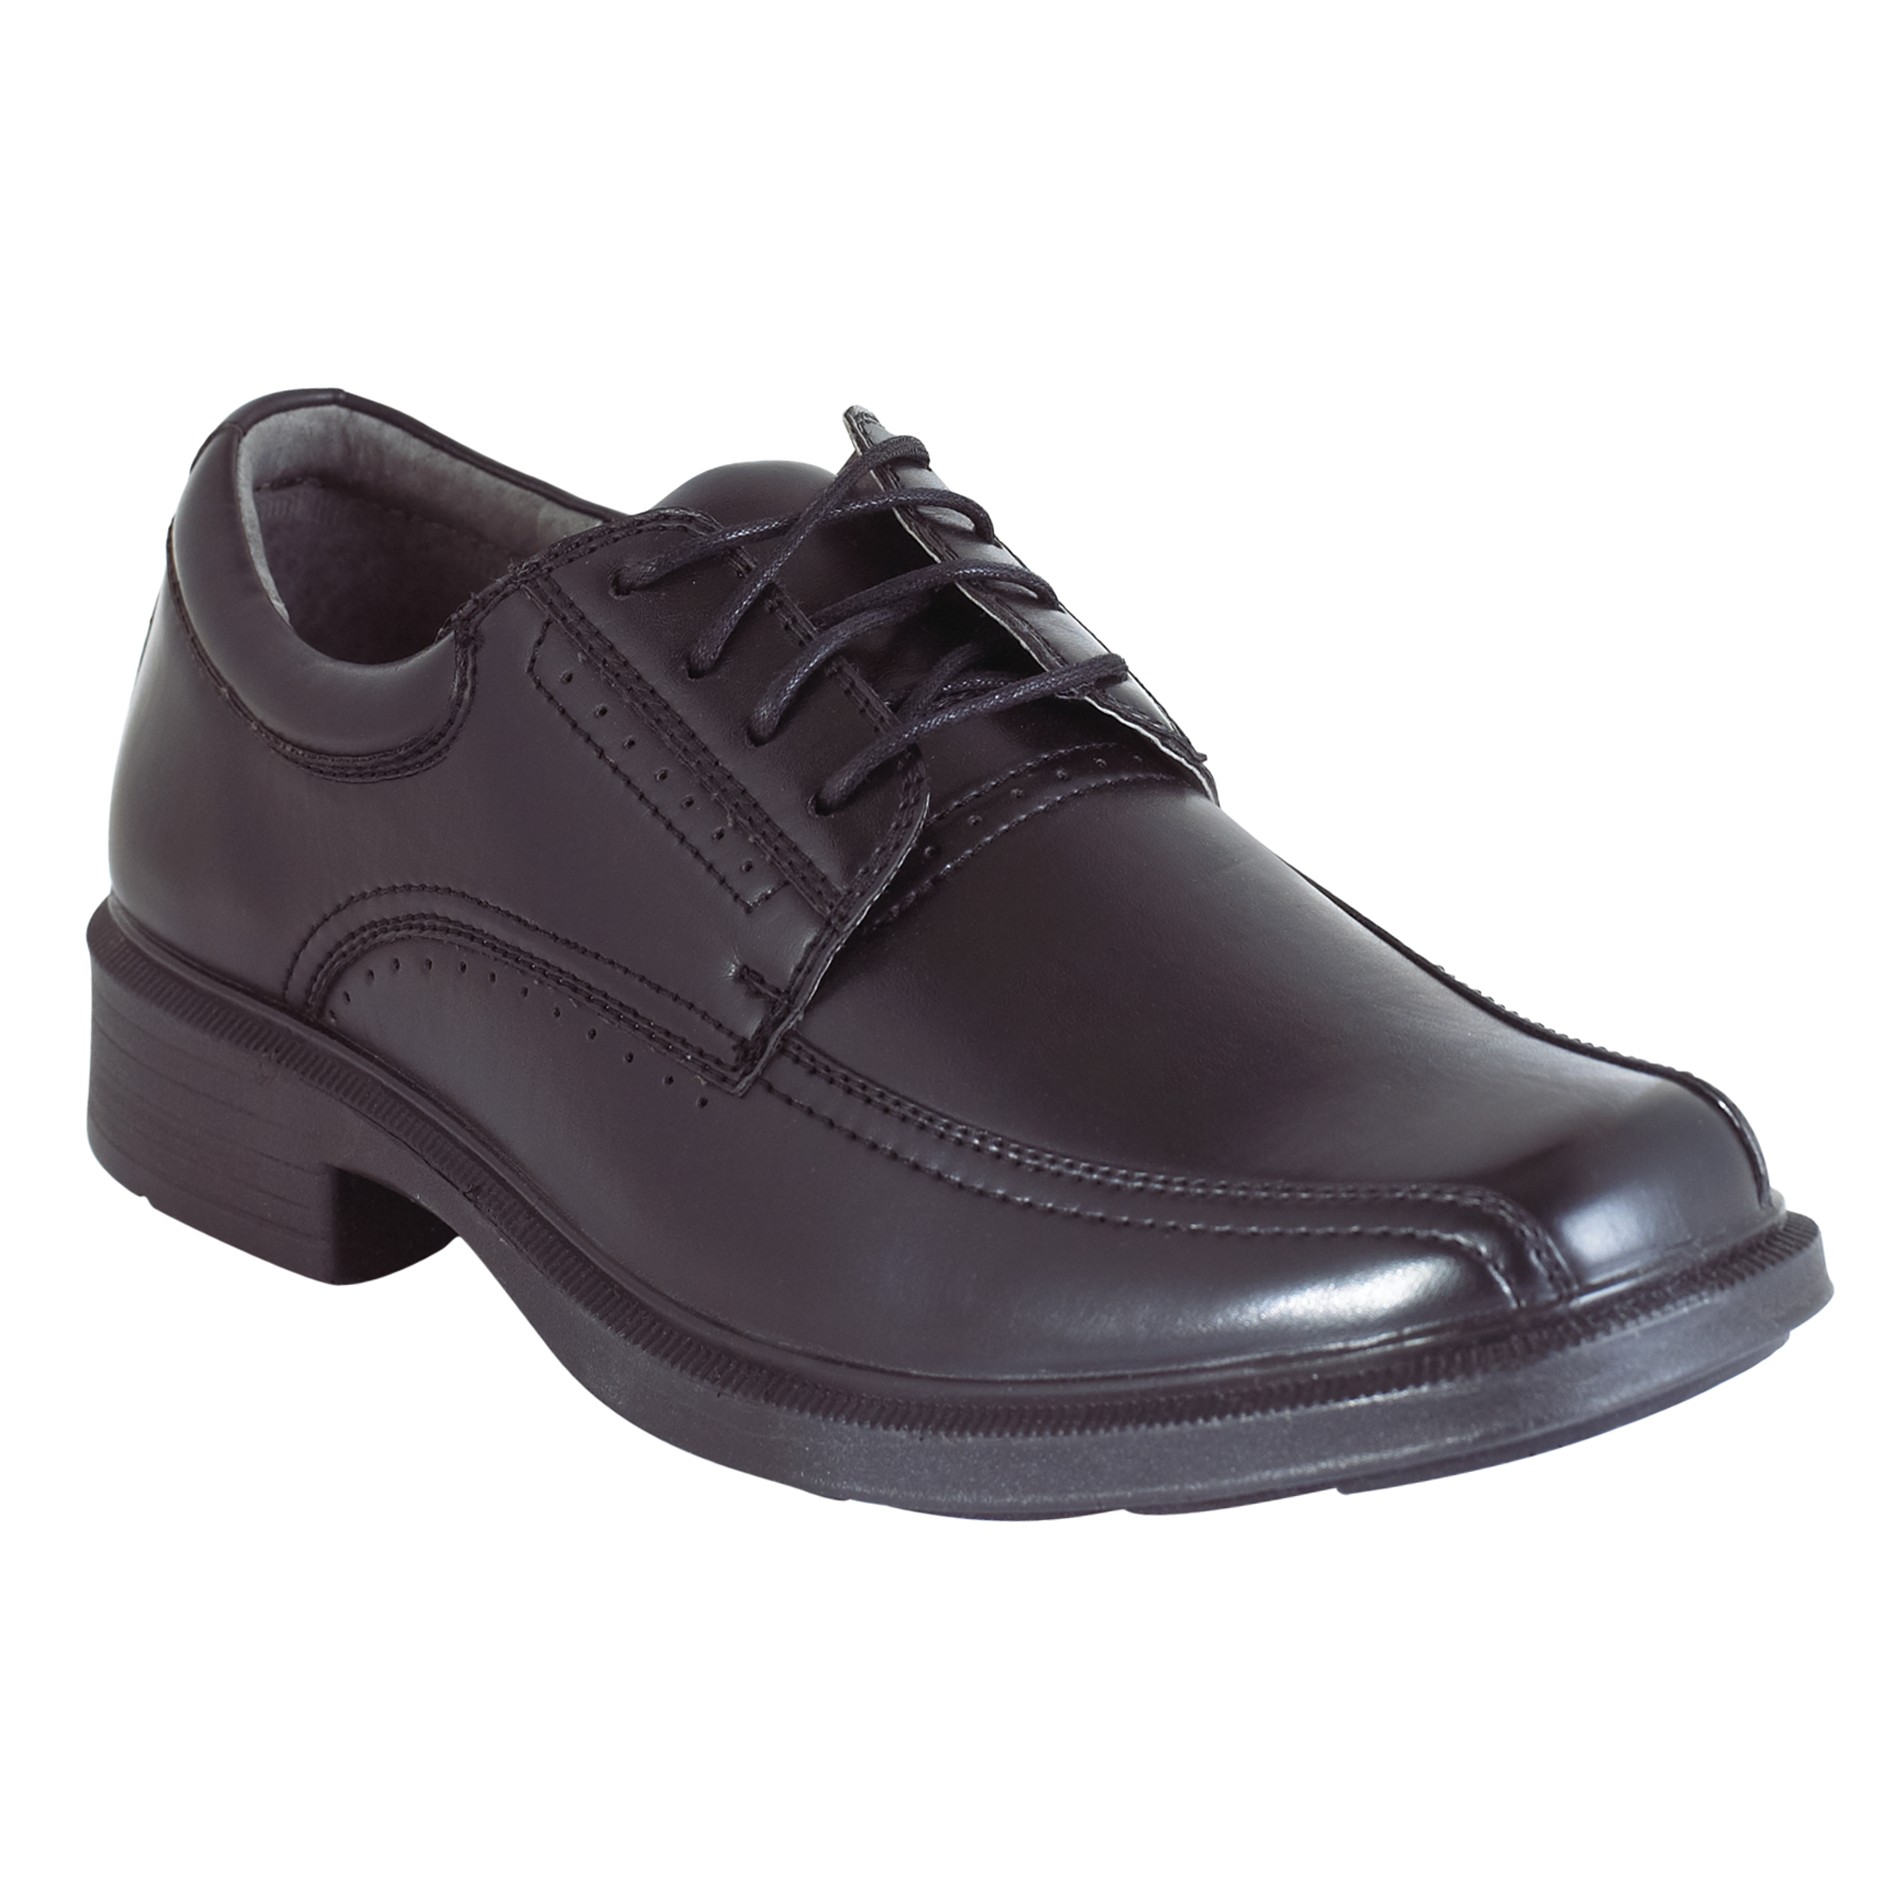 Men's 902 Collection Williamsburg Dress Oxford - Black Wide Width Available